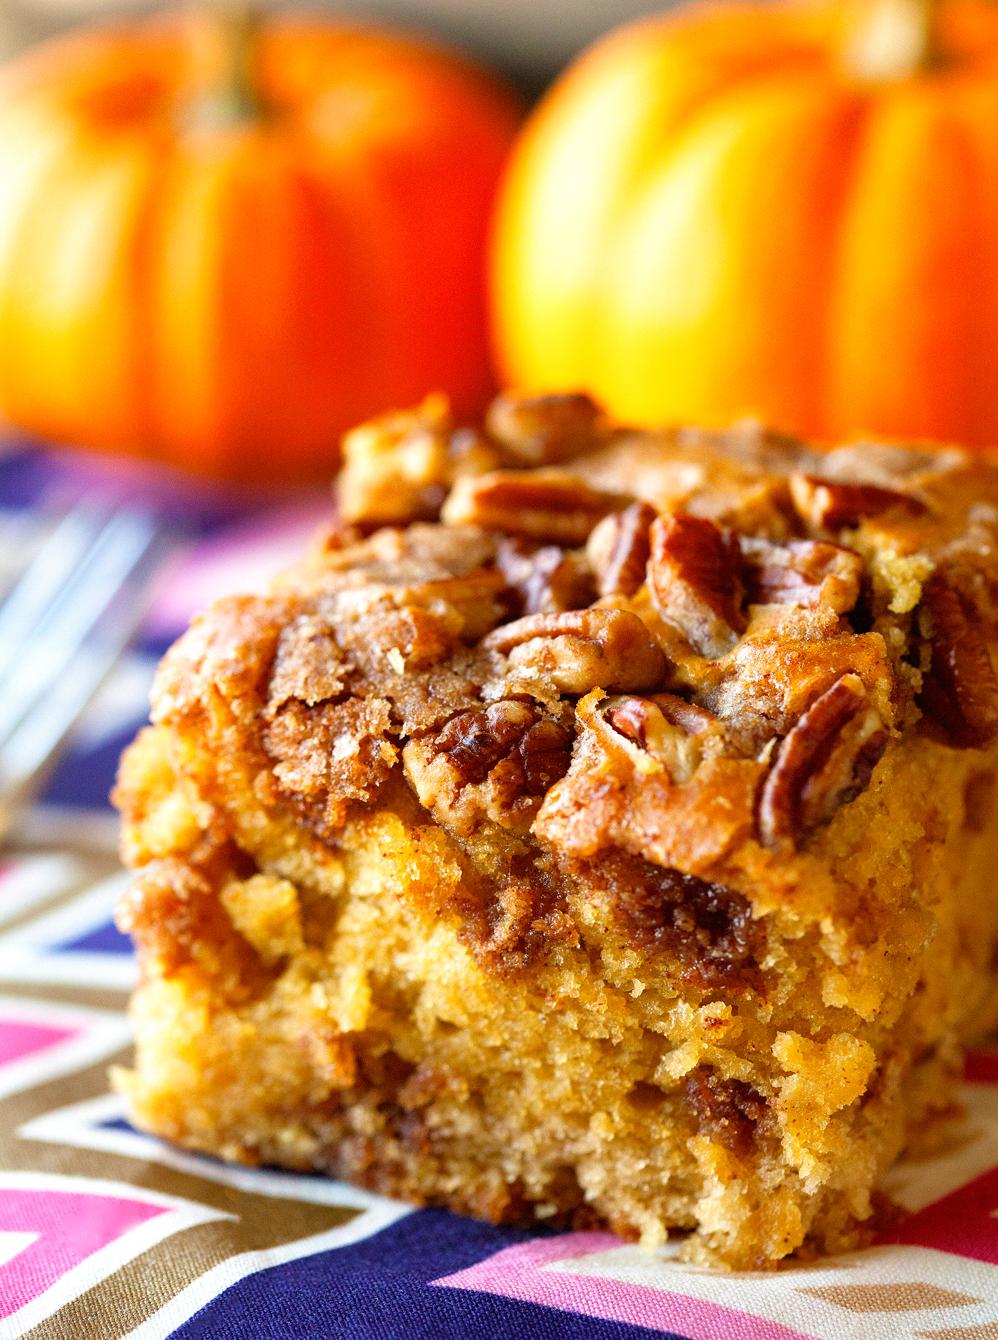  Make your morning routine a little sweeter with this pumpkin delight